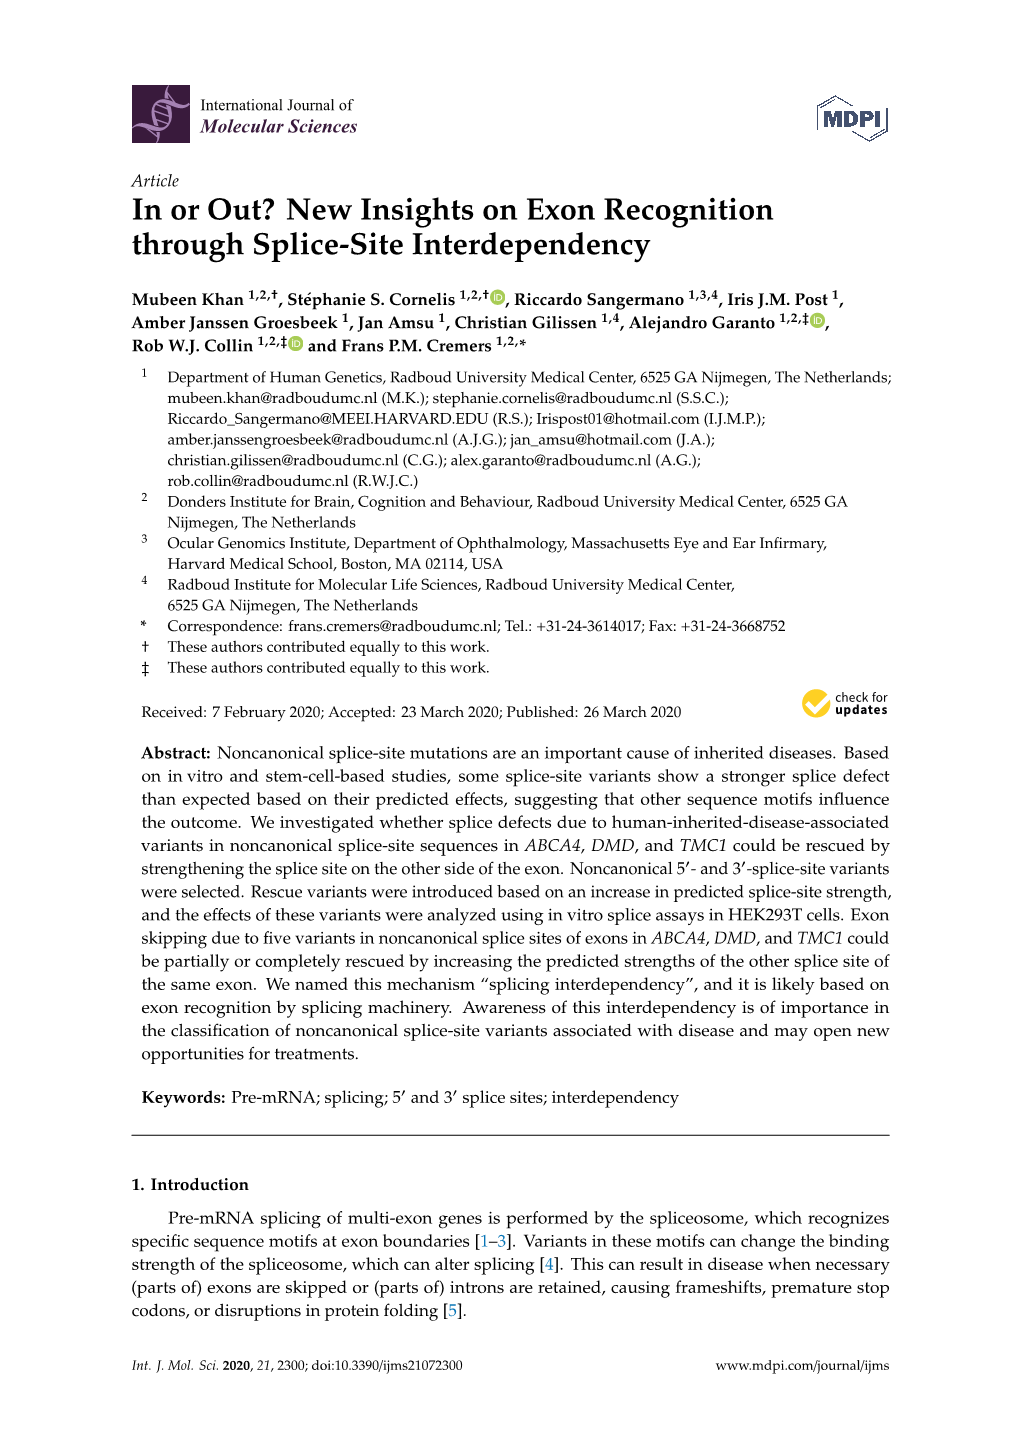 New Insights on Exon Recognition Through Splice-Site Interdependency